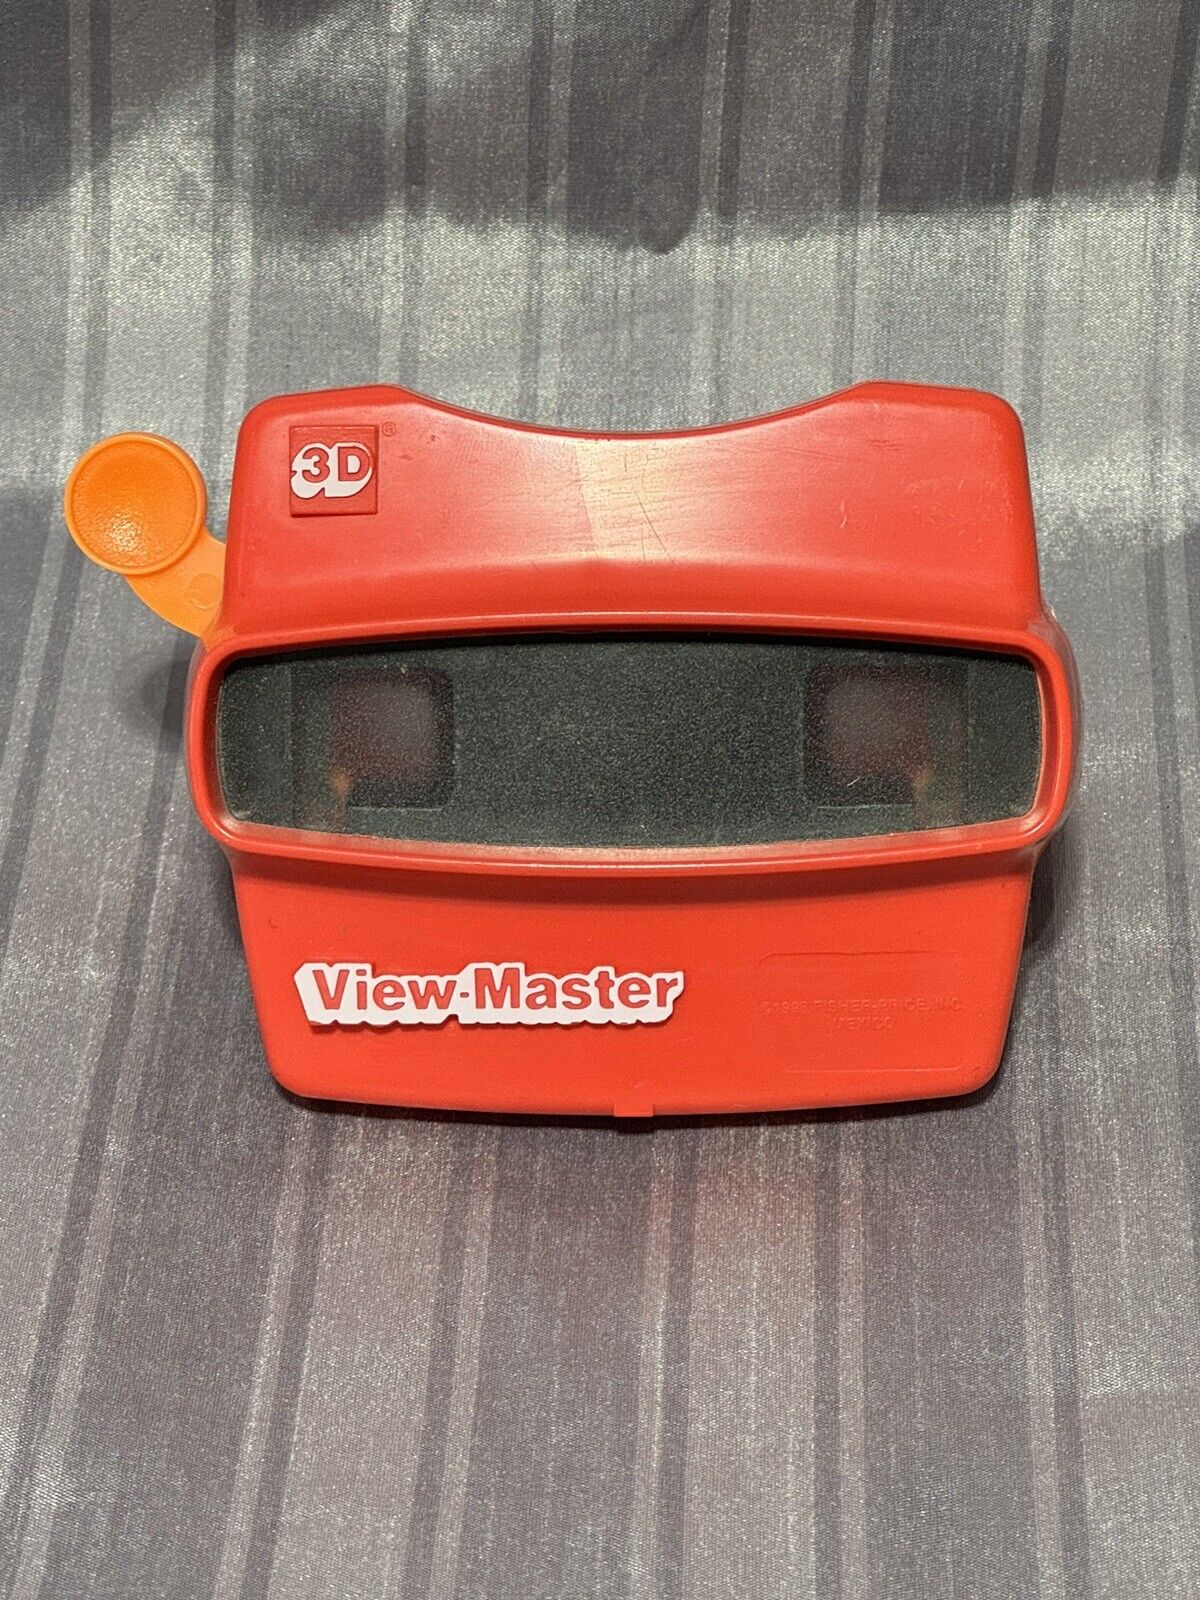 Vintage Red Viewmaster 3D View-Master Viewer Toy, Orange Lever (1998)